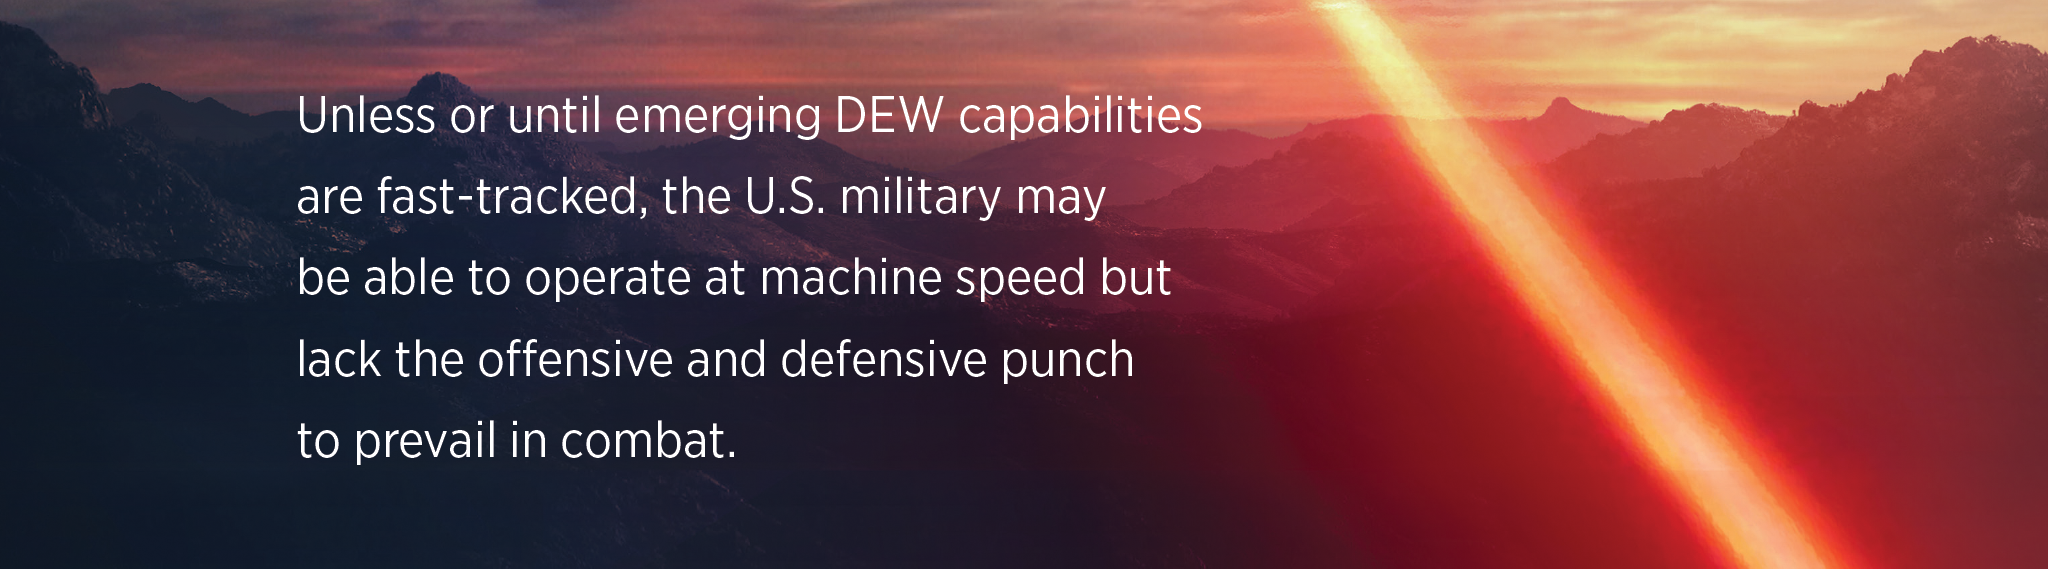 Unless or until emerging DEW capabilities are fast-tracked, the U.S. military may  be able to operate at machine speed but lack the offensive and defensive punch  to prevail in combat.